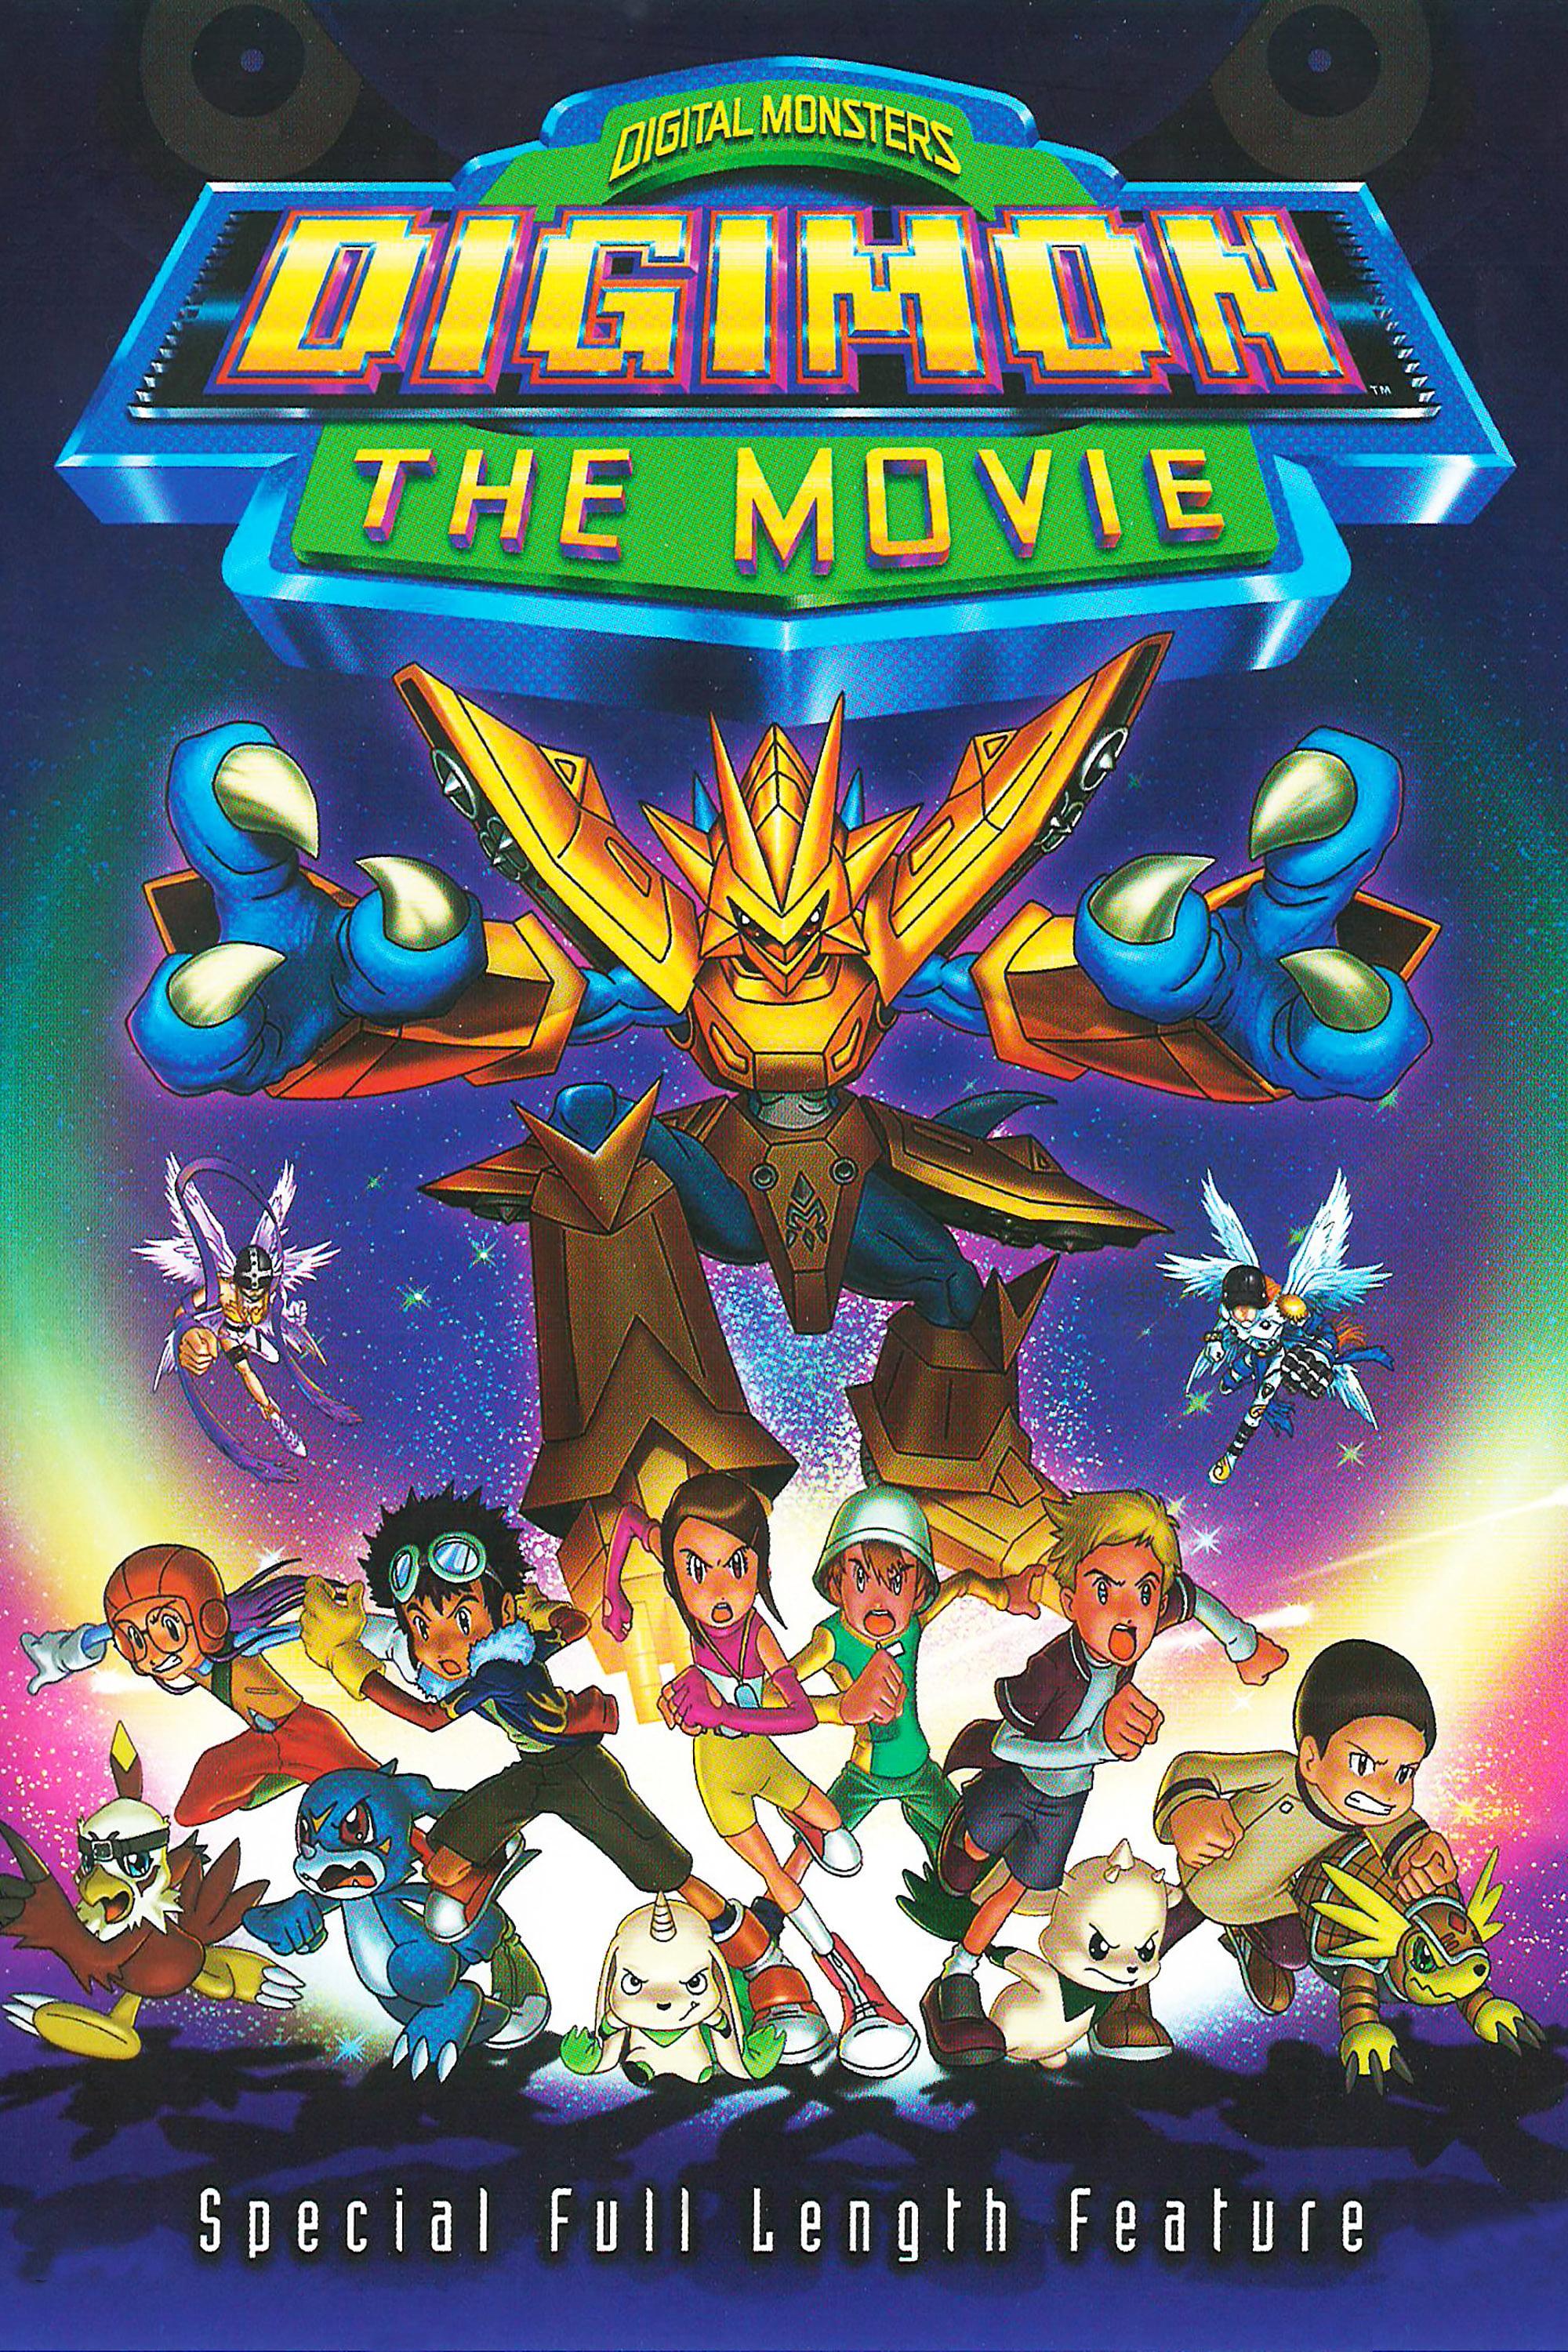 Digimon: The Movie poster